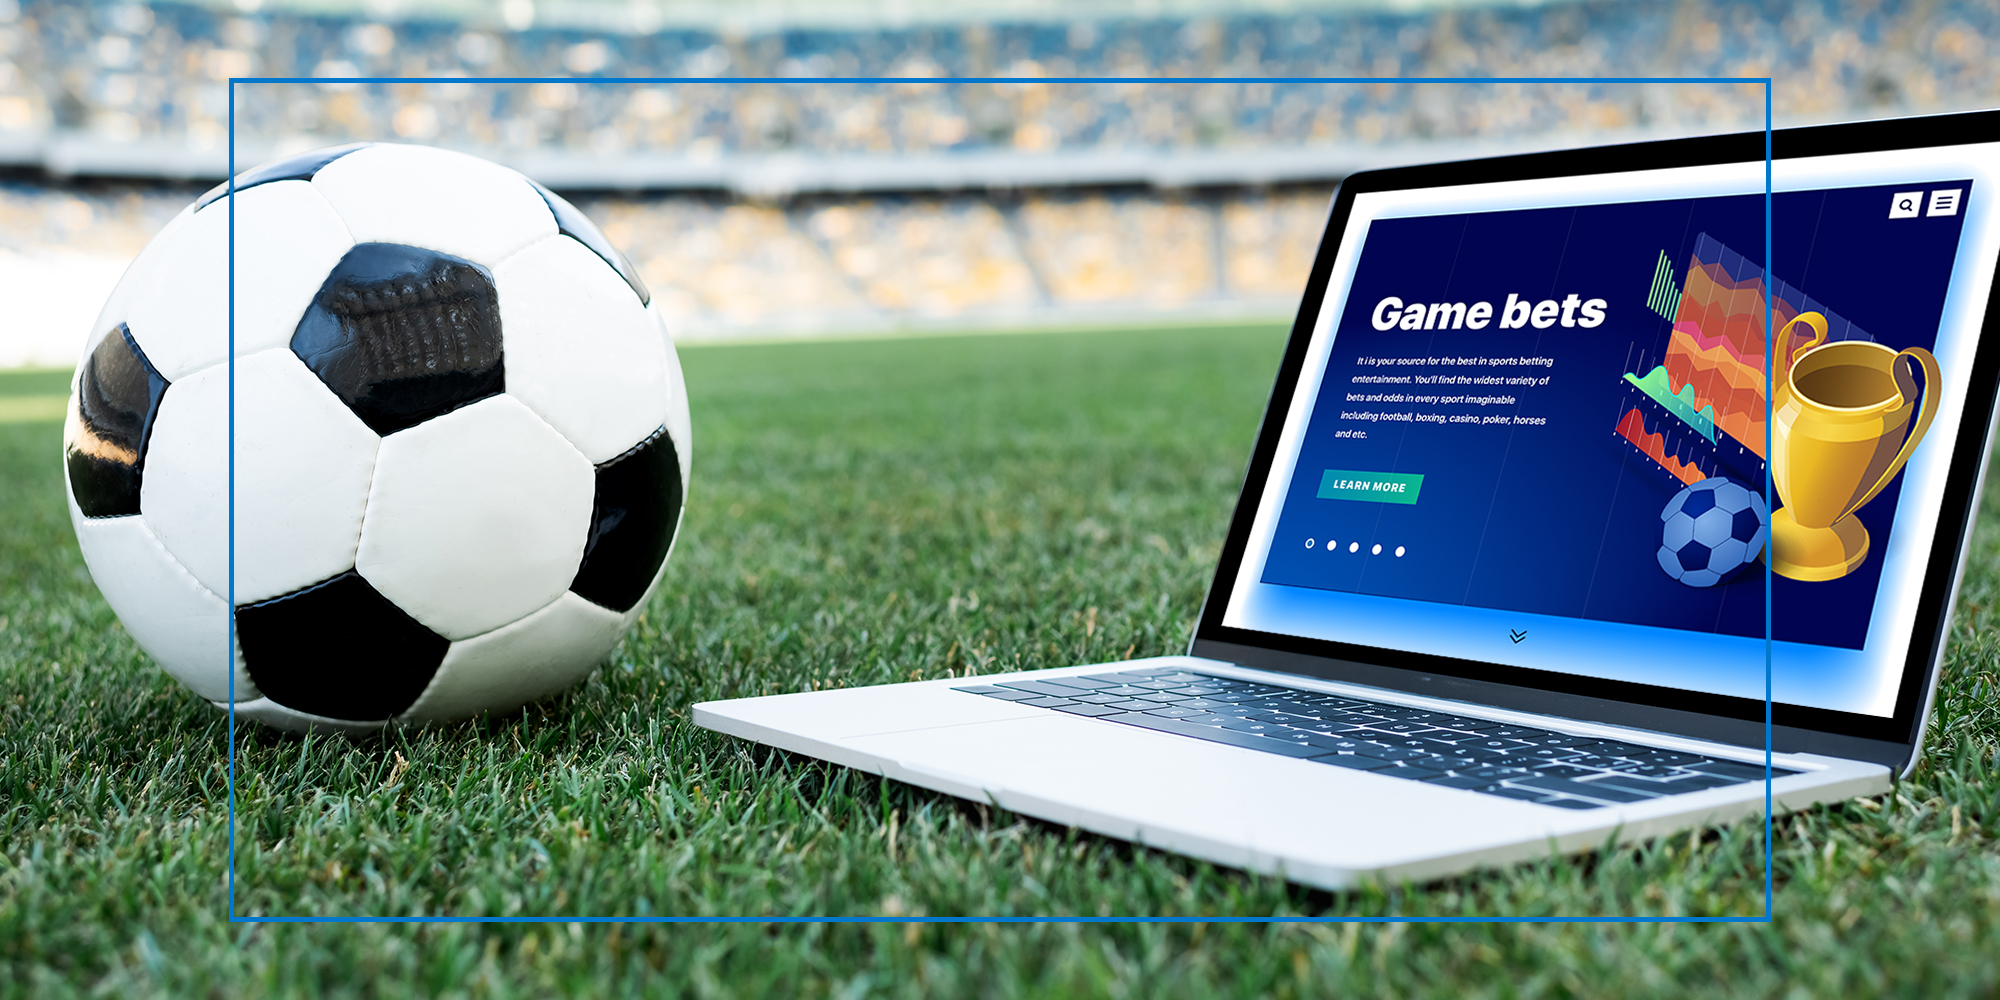 Soccer gambling site on laptop with ball